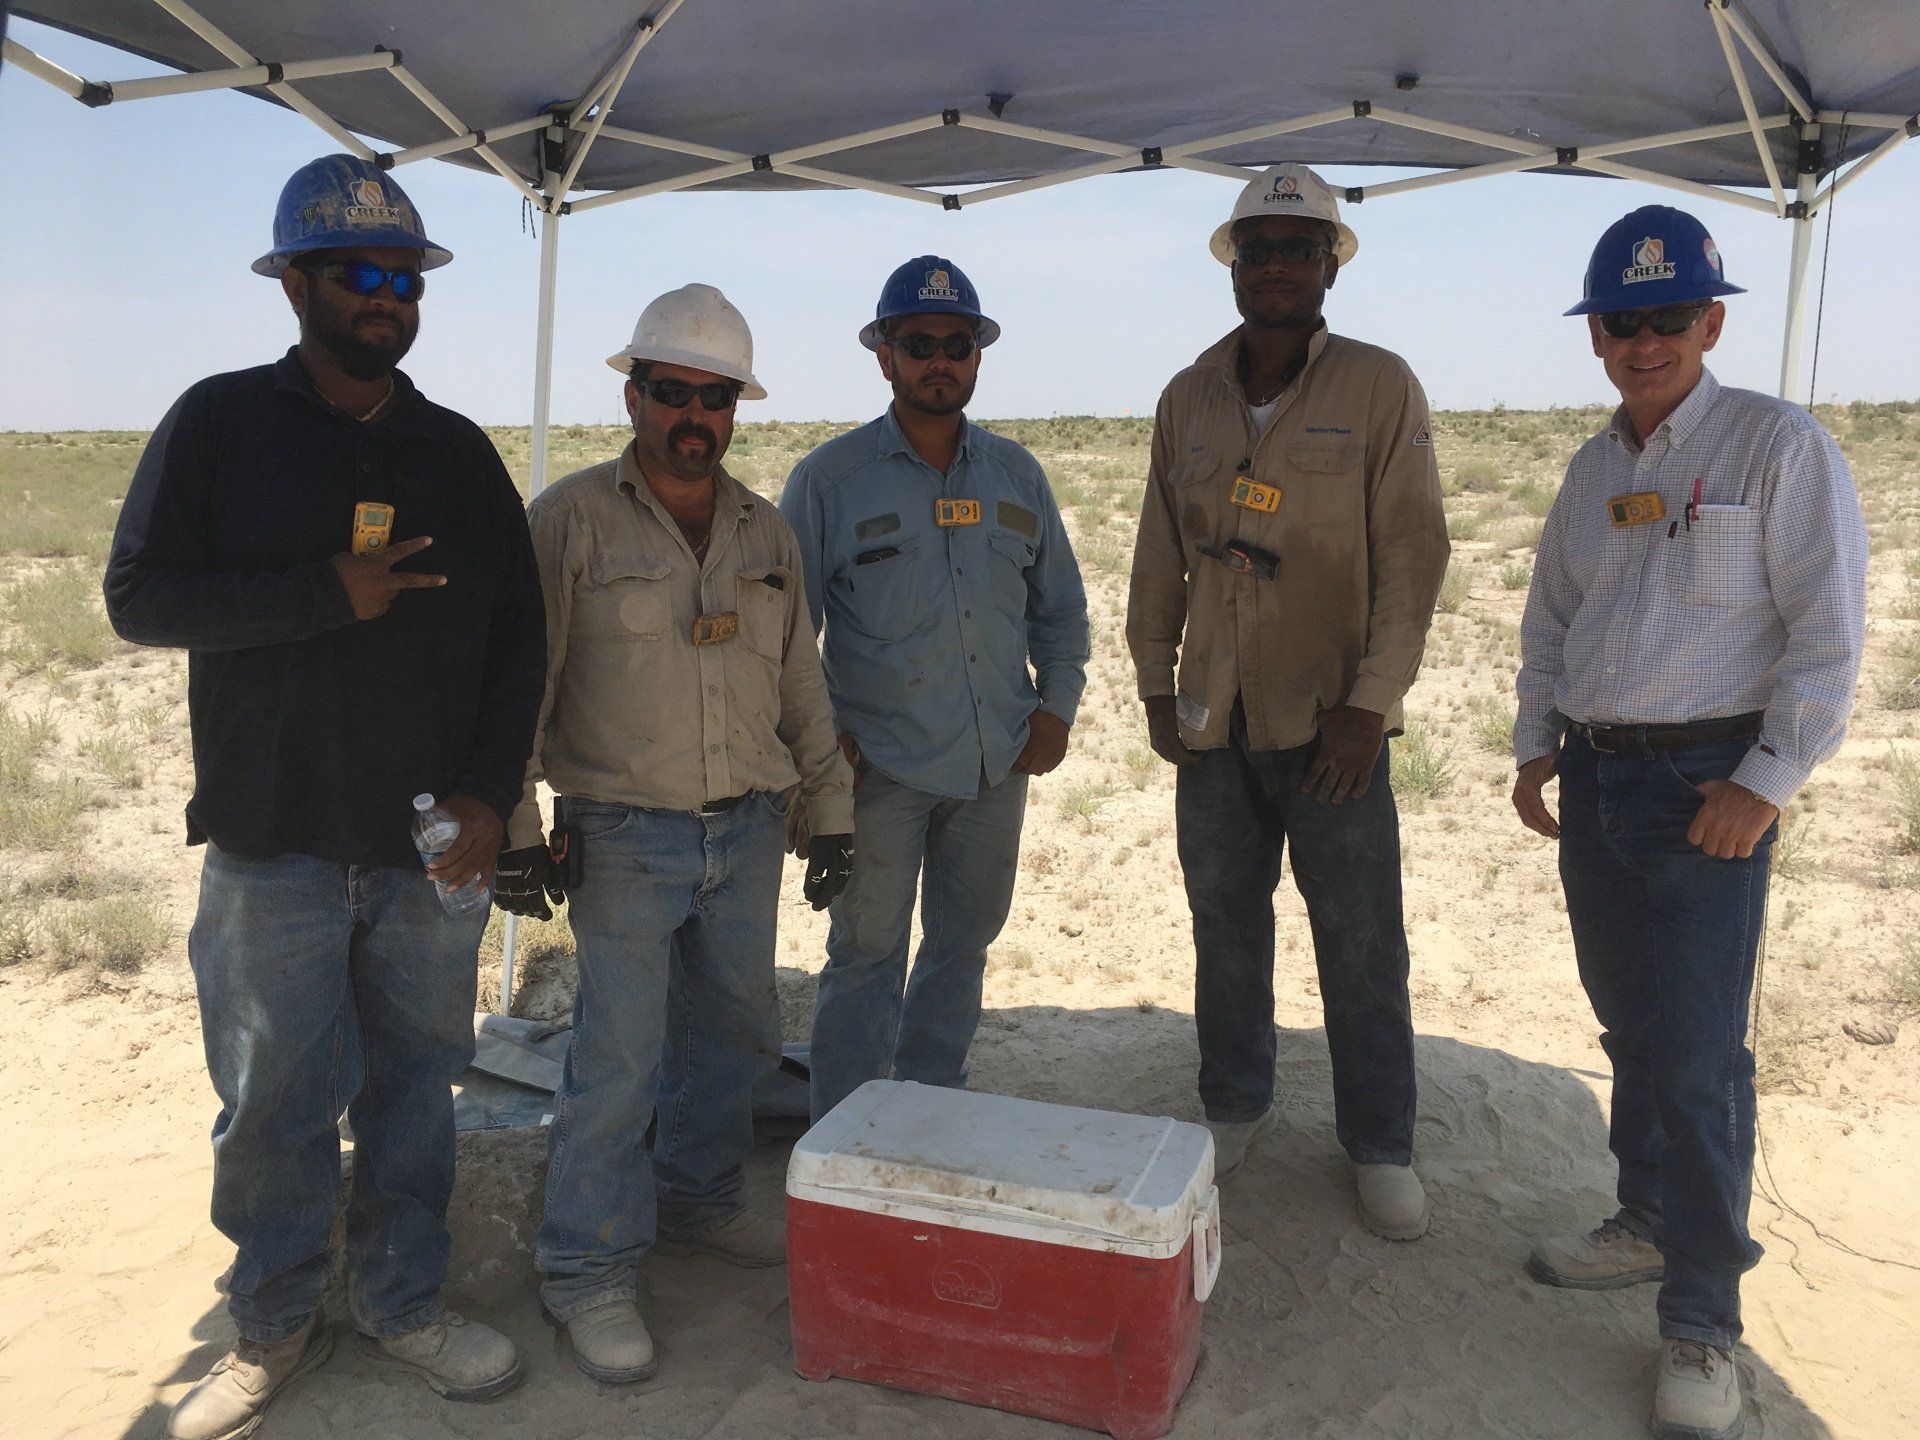 Roustabout crew in the Permian Basin, TX